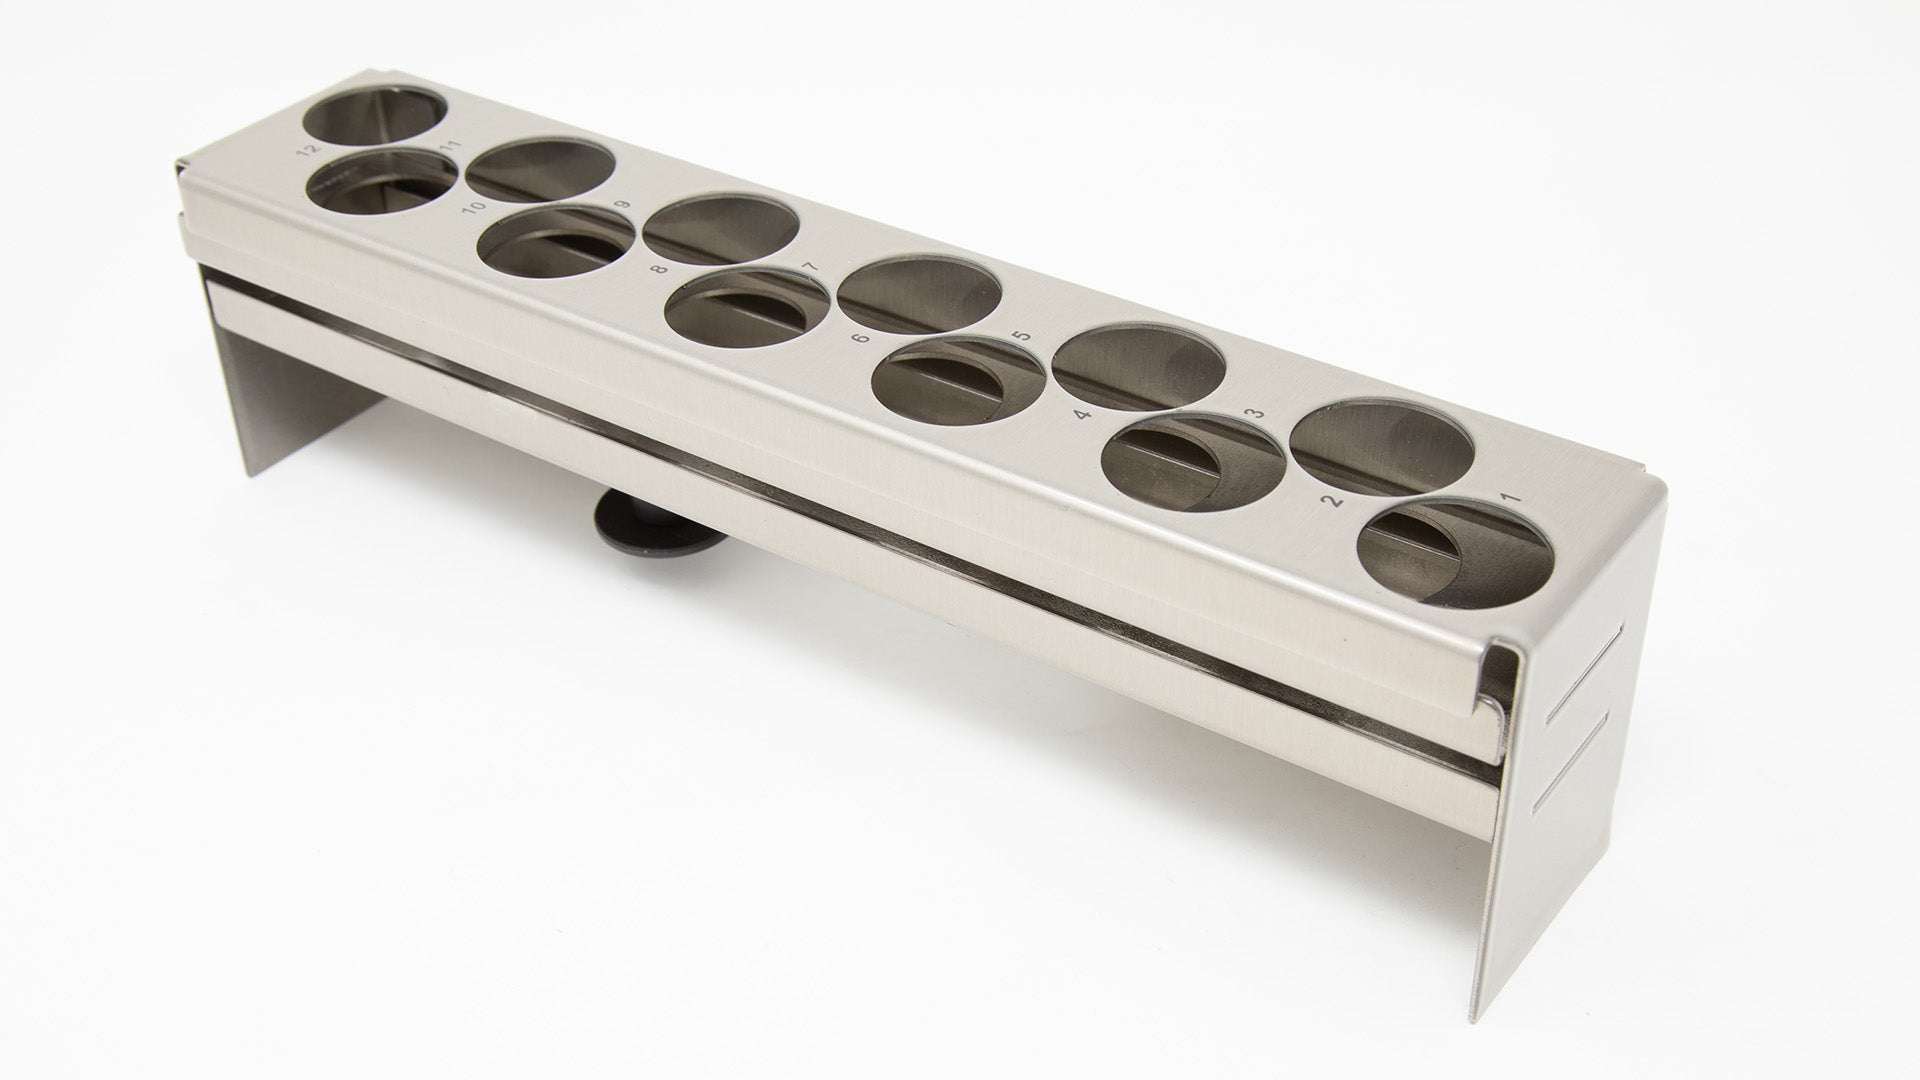 Stainless steel rack with holes to hold vials